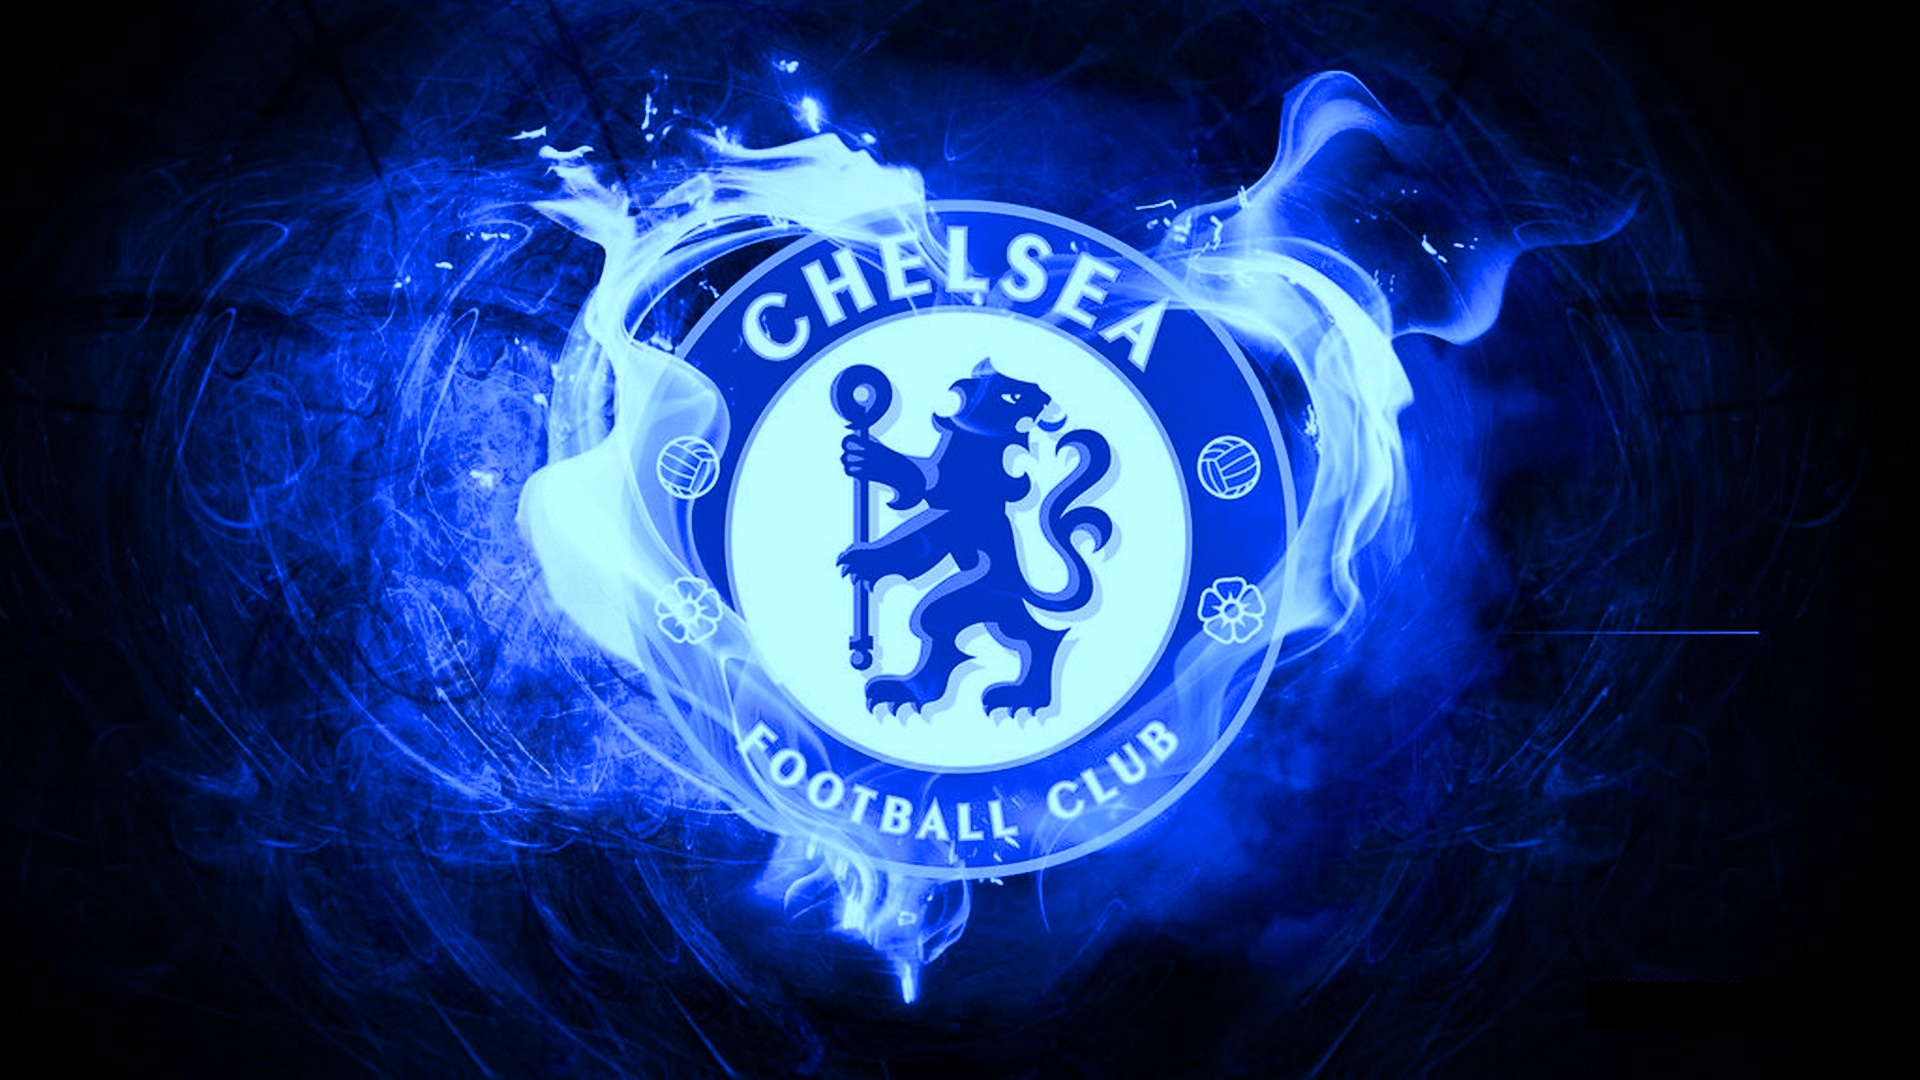 HD Desktop Wallpaper Chelsea FC with high-resolution 1920x1080 pixel. You can use this wallpaper for your Desktop Computers, Mac Screensavers, Windows Backgrounds, iPhone Wallpapers, Tablet or Android Lock screen and another Mobile device